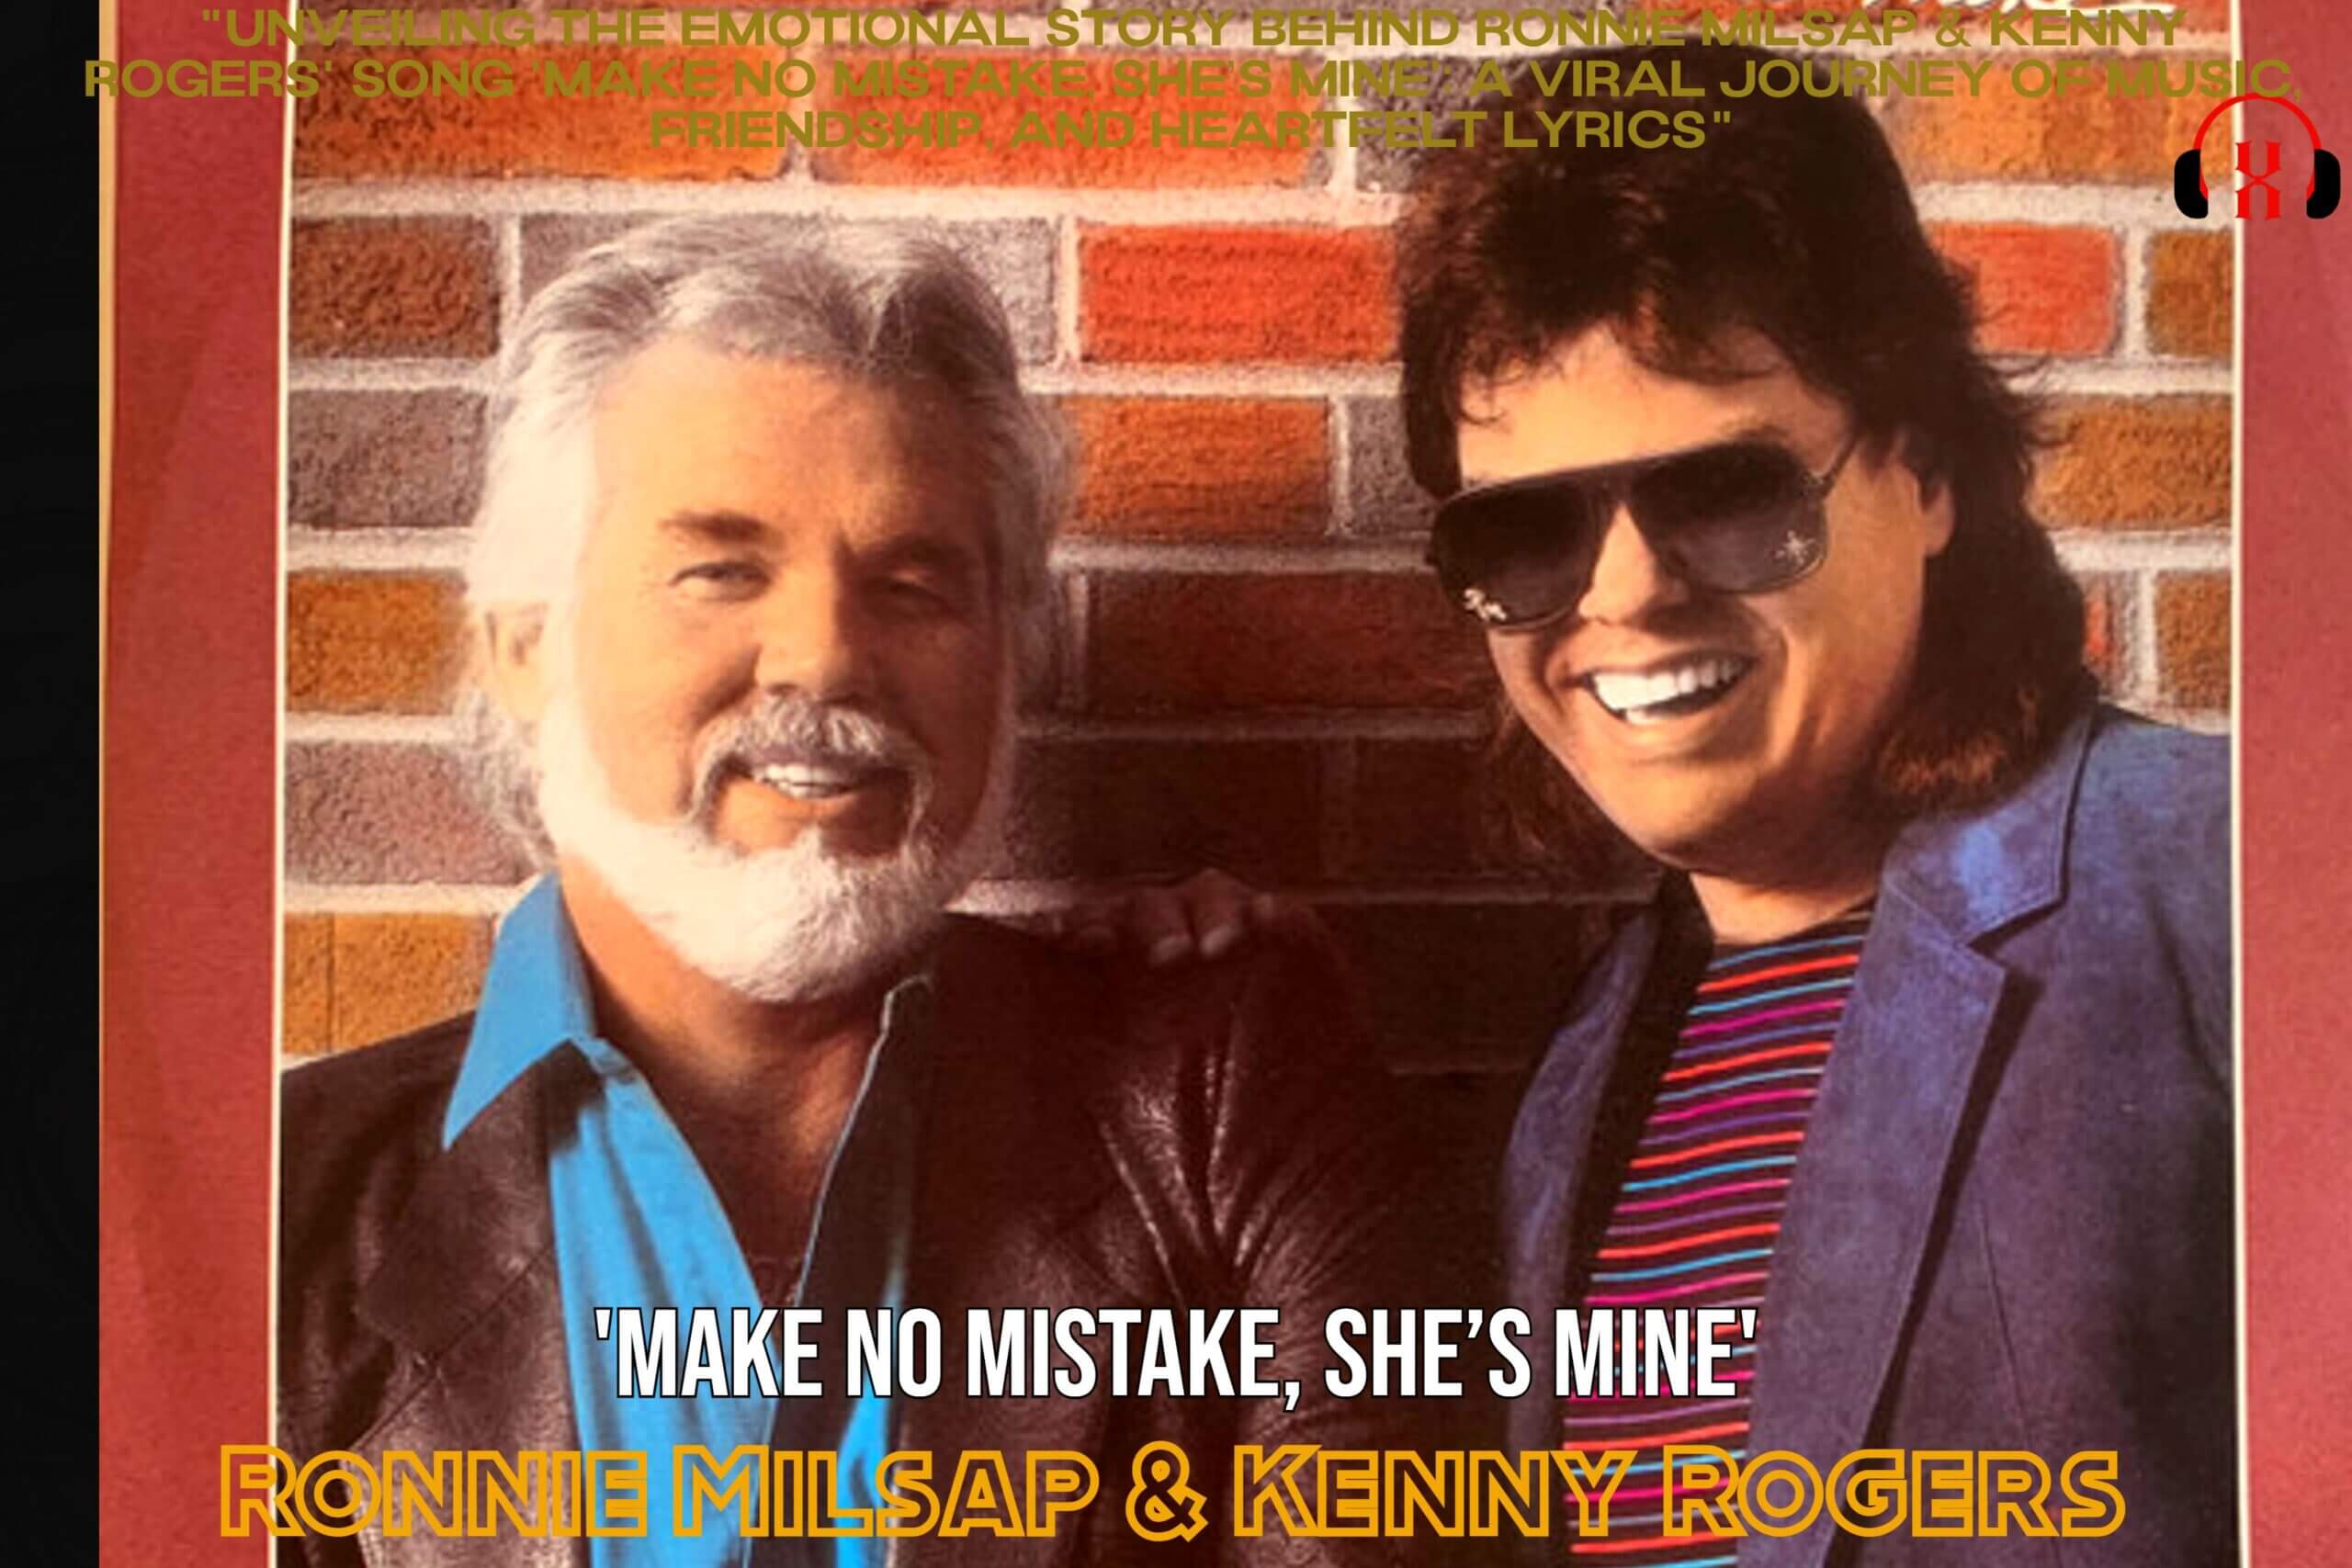 Ronnie Milsap & Kenny Rogers' Song 'Make No Mistake, She’s Mine': A Viral Journey of Music, Friendship, and Heartfelt Lyrics"